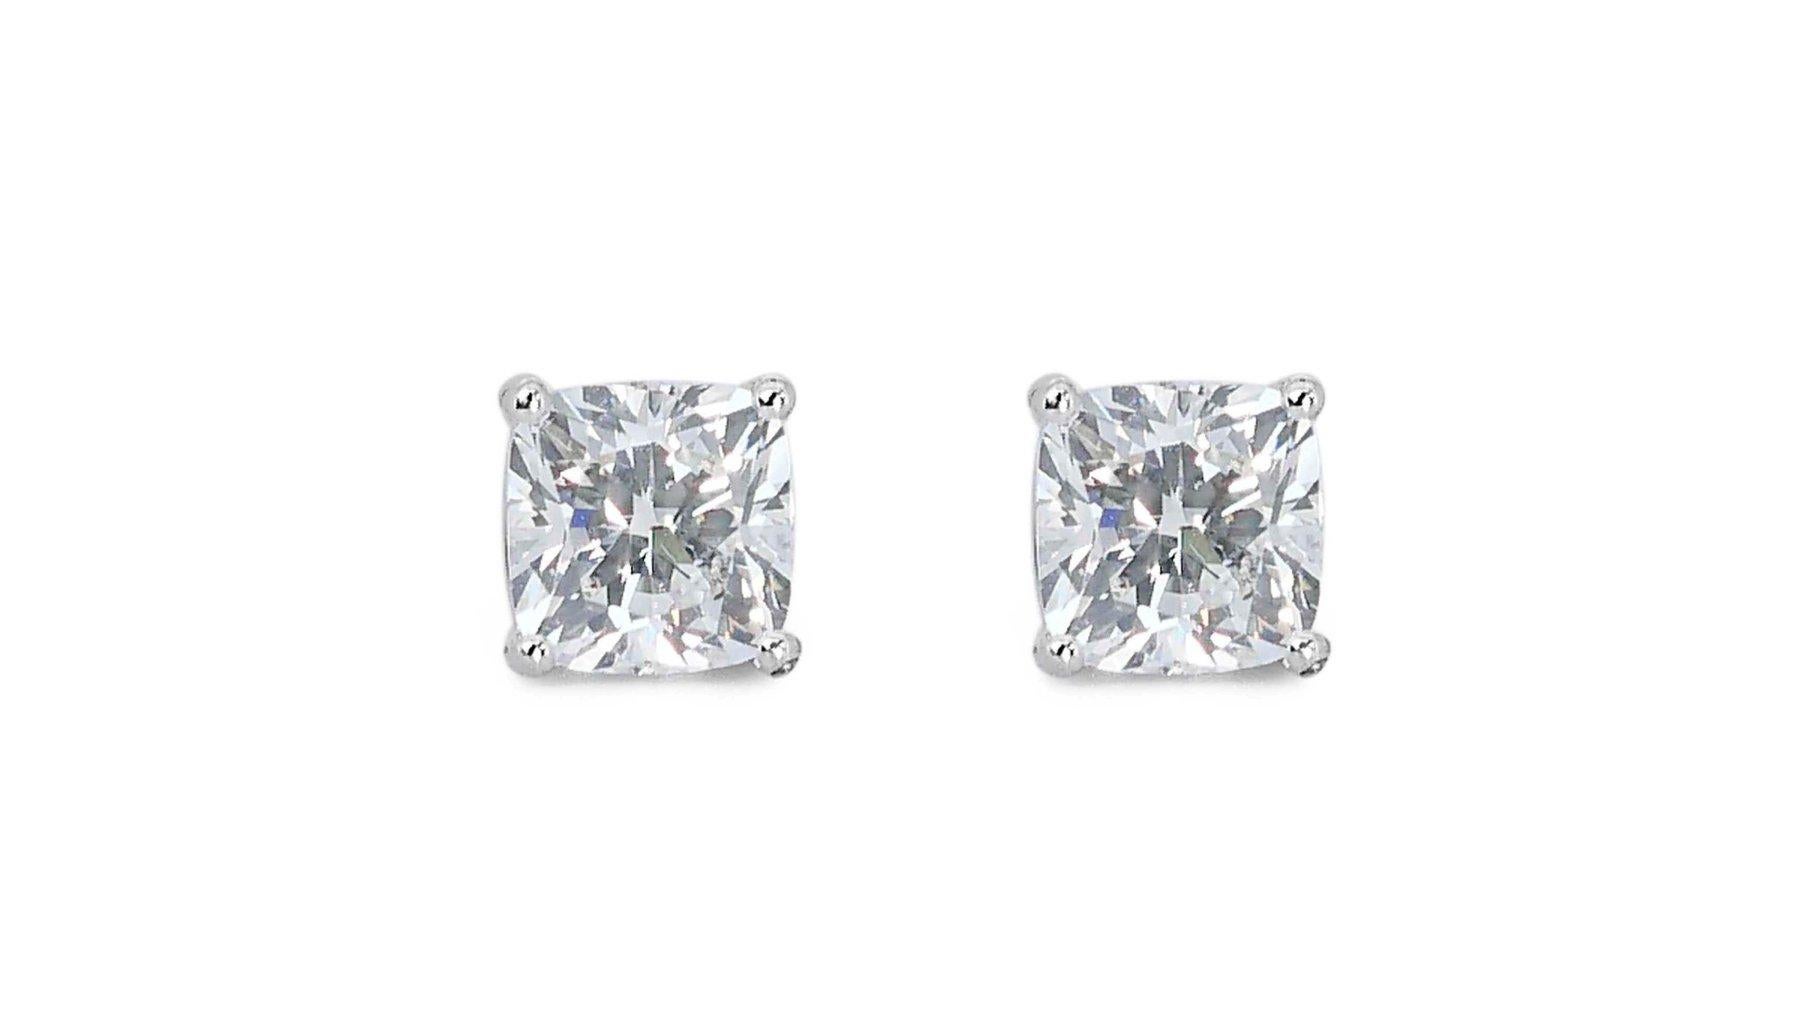 This stunning pair of 18K white gold earrings features a dazzling 2.06 carat square modified diamond in each ear. The diamonds are certified by IGI as G-H color, VS2 clarity, and VG cut grade. This means that the diamonds are nearly colorless and